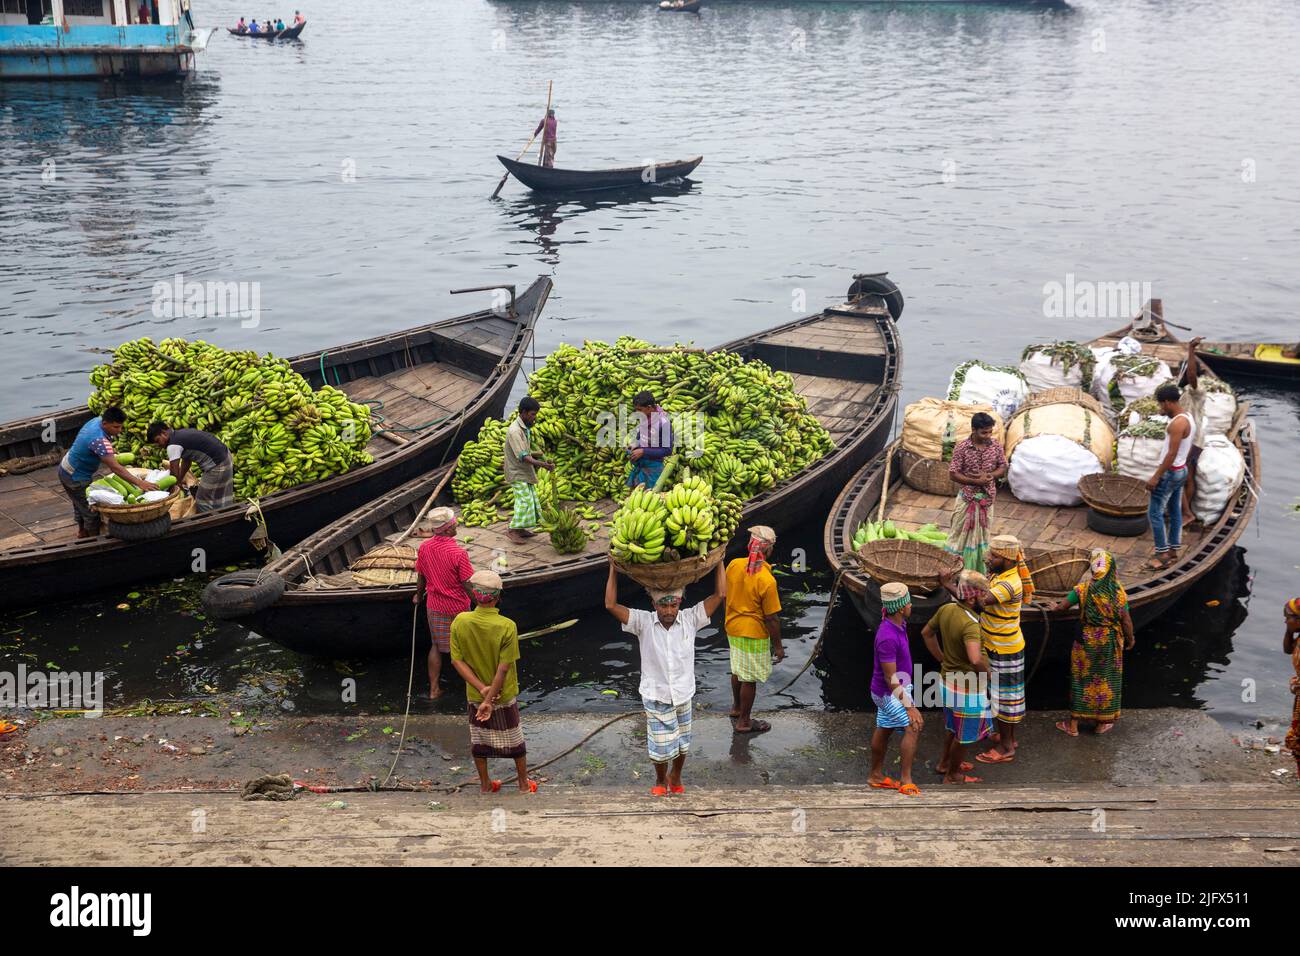 Workers are busy offloading seasonal fruits from boats at Wiseghat in Old Dhaka. Bangladesh Stock Photo